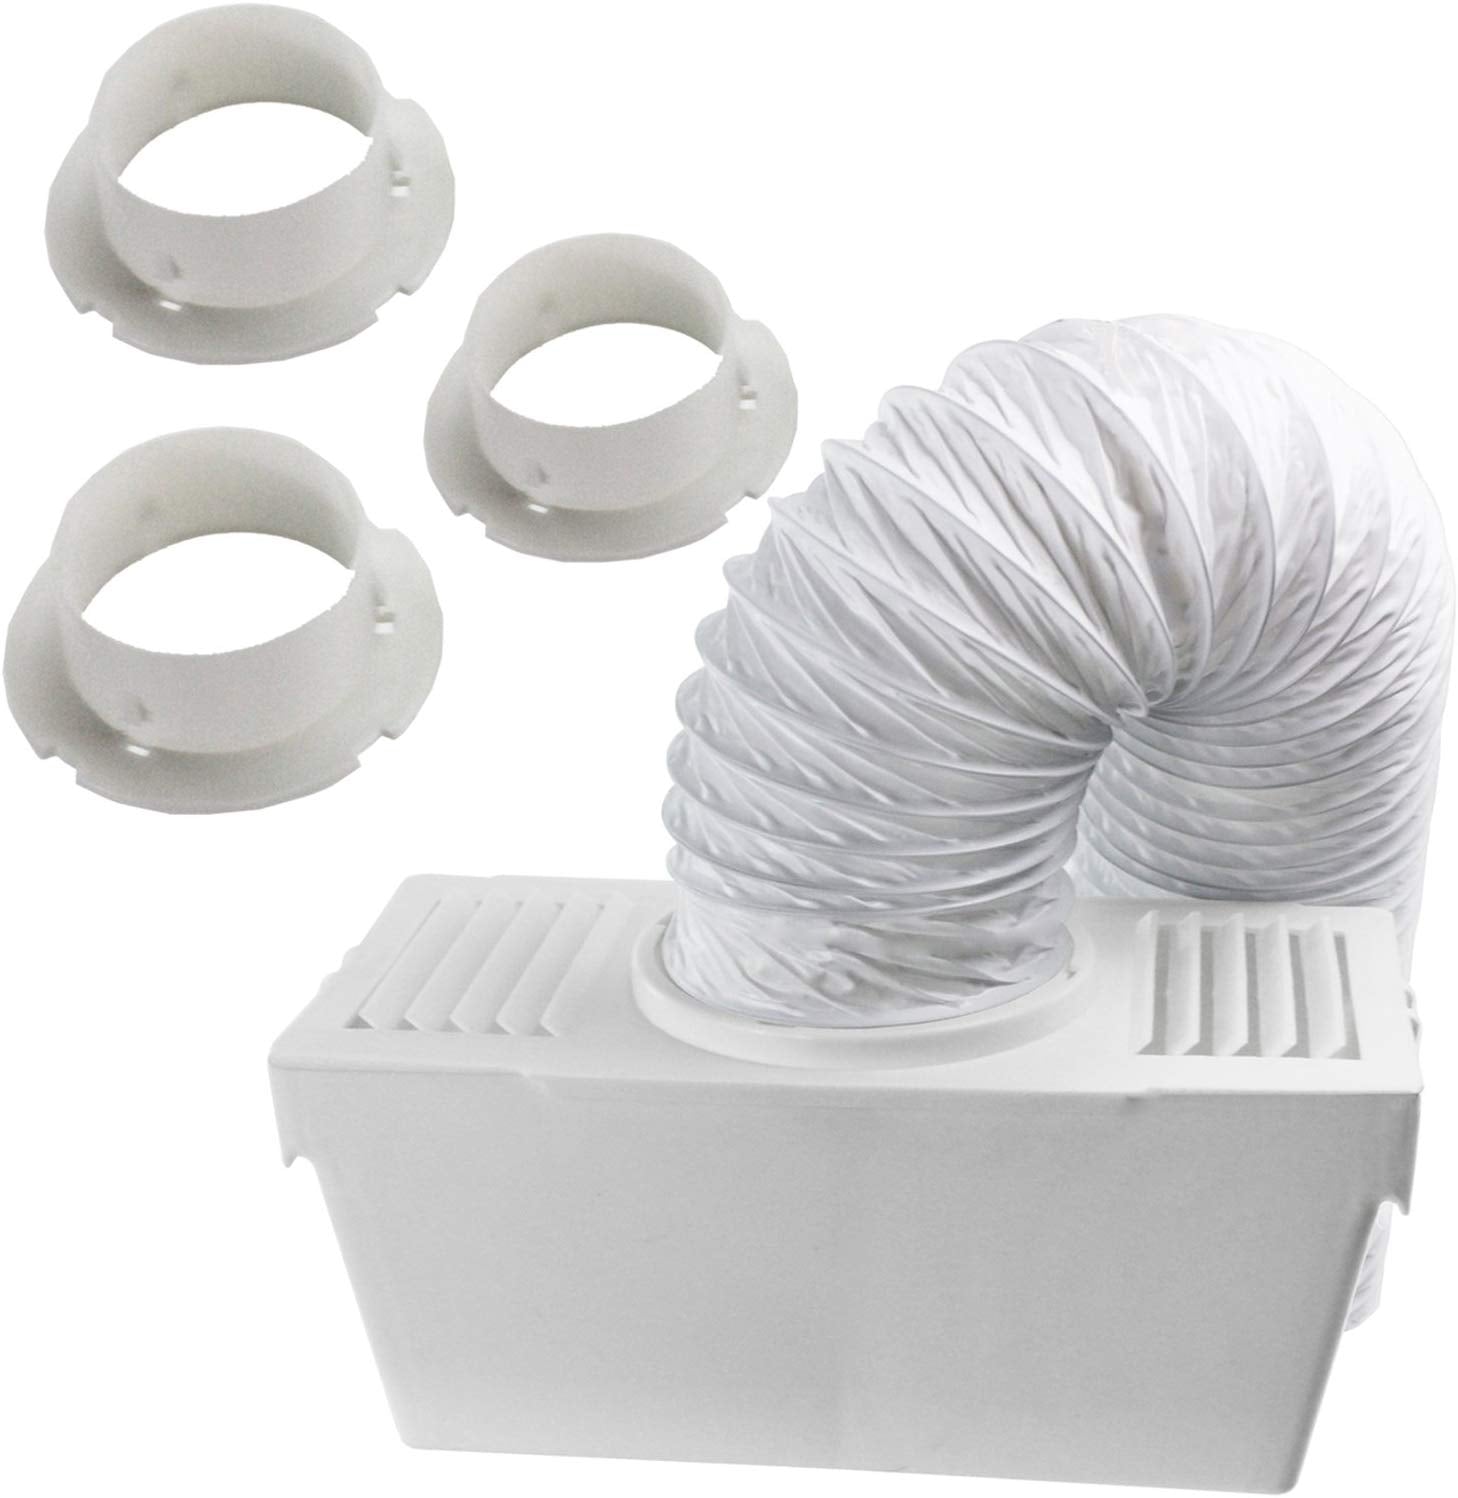 Vent Hose Condenser Kit with 3 x Adapters for Russell Hobbs Tumble Dryer (1.2m)